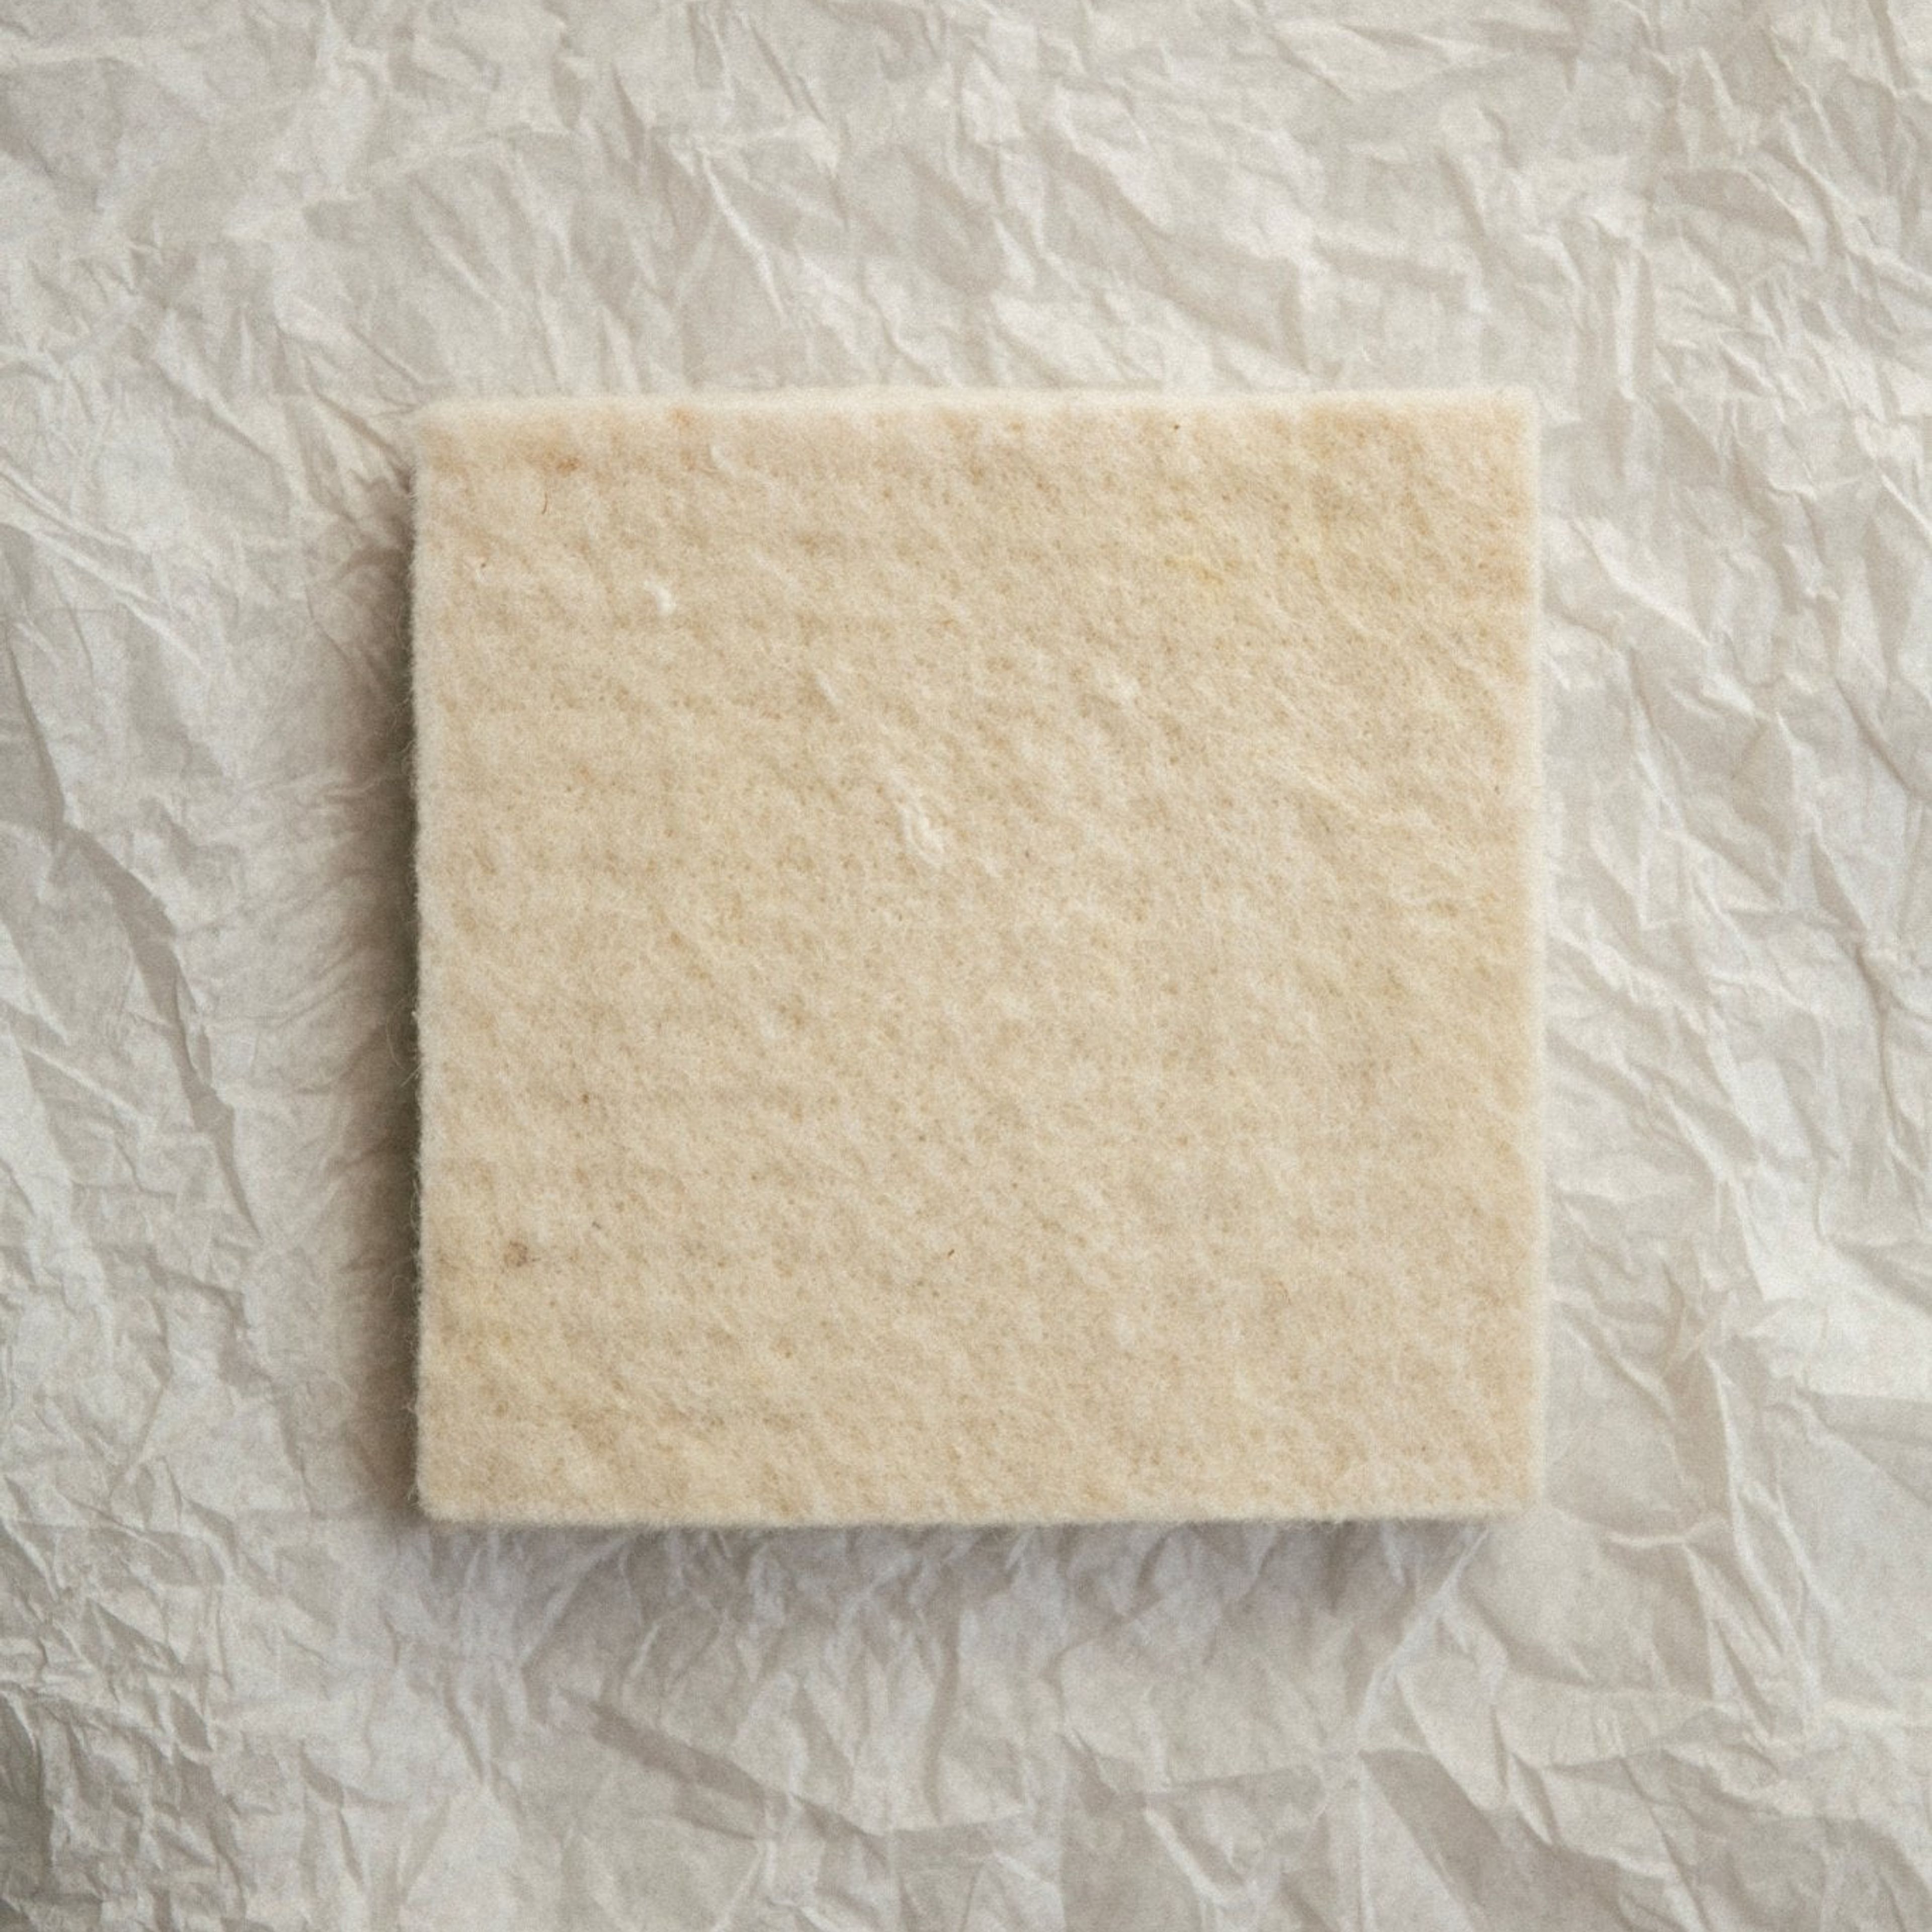 Climate Beneficial Wool Sponges in Cream